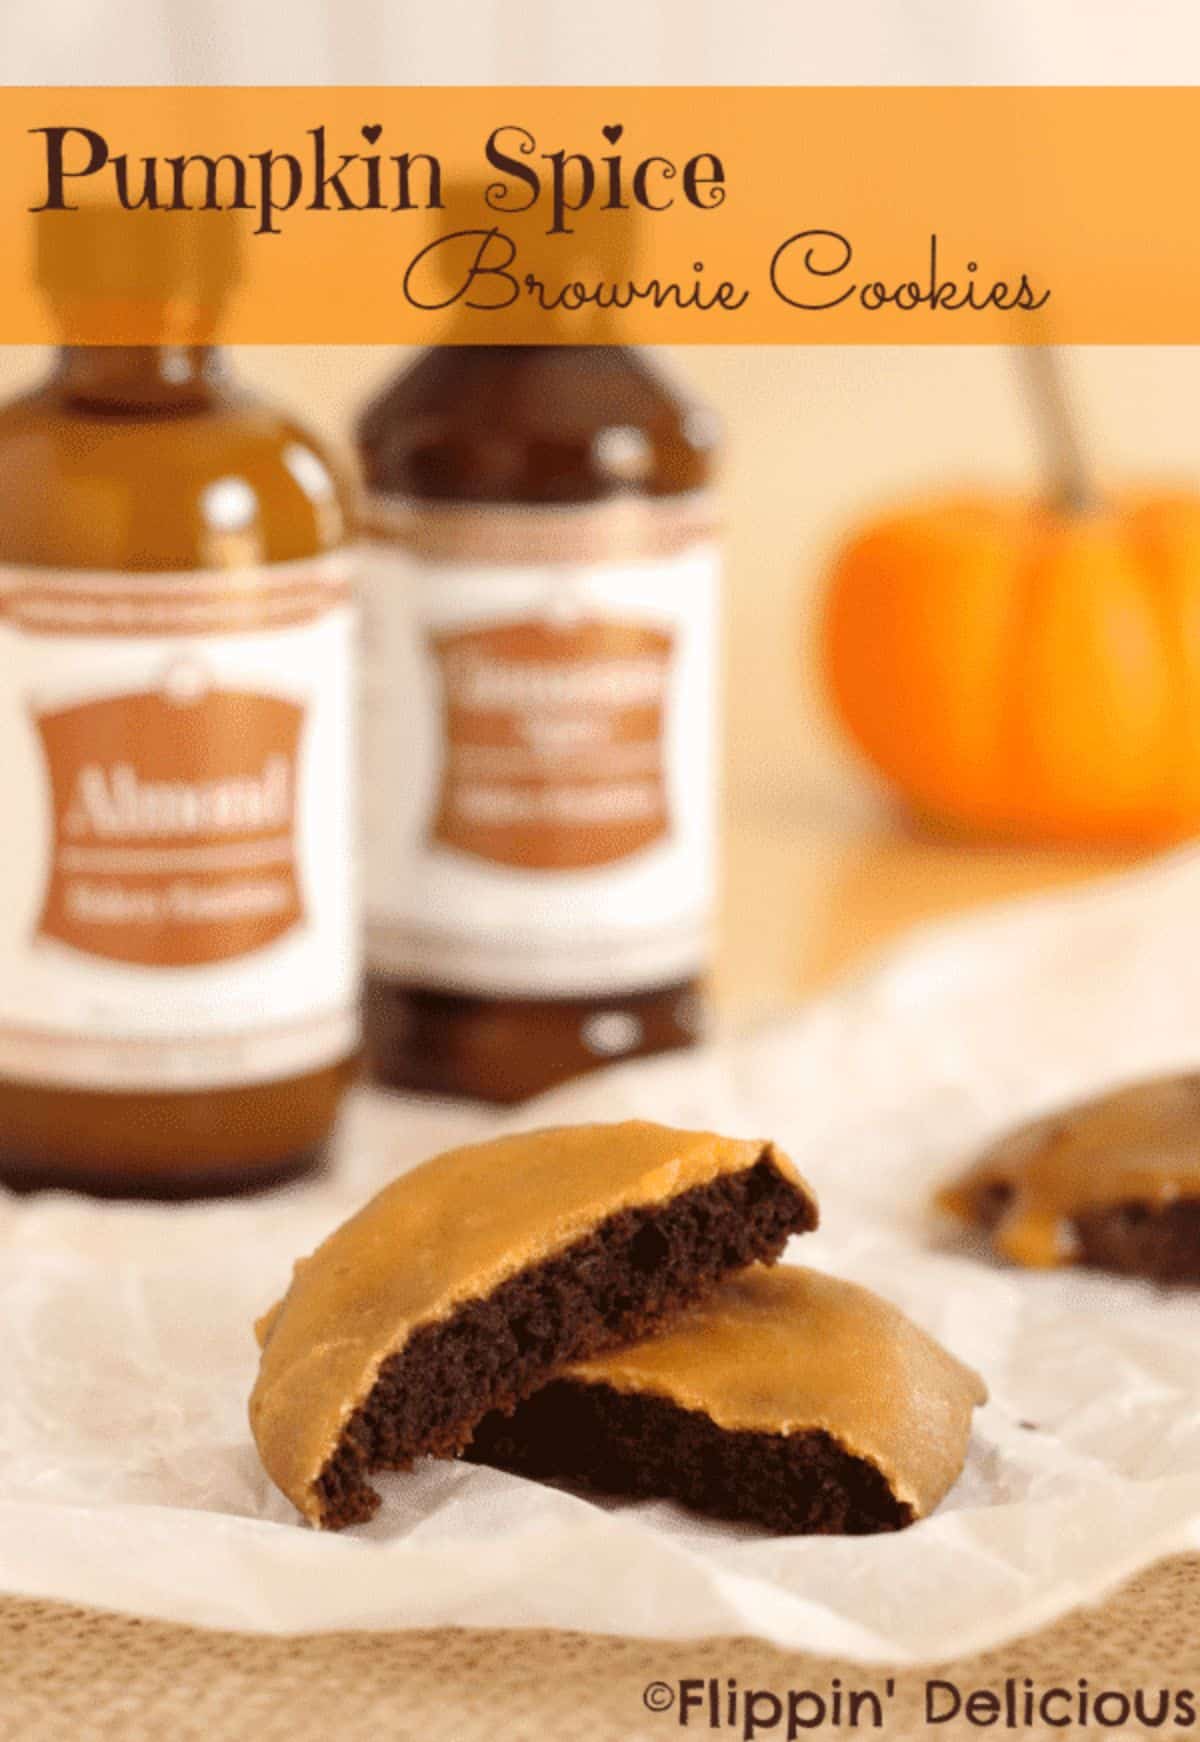 Two Pumpkin Spice Brownie Cookies on a paper napkin.